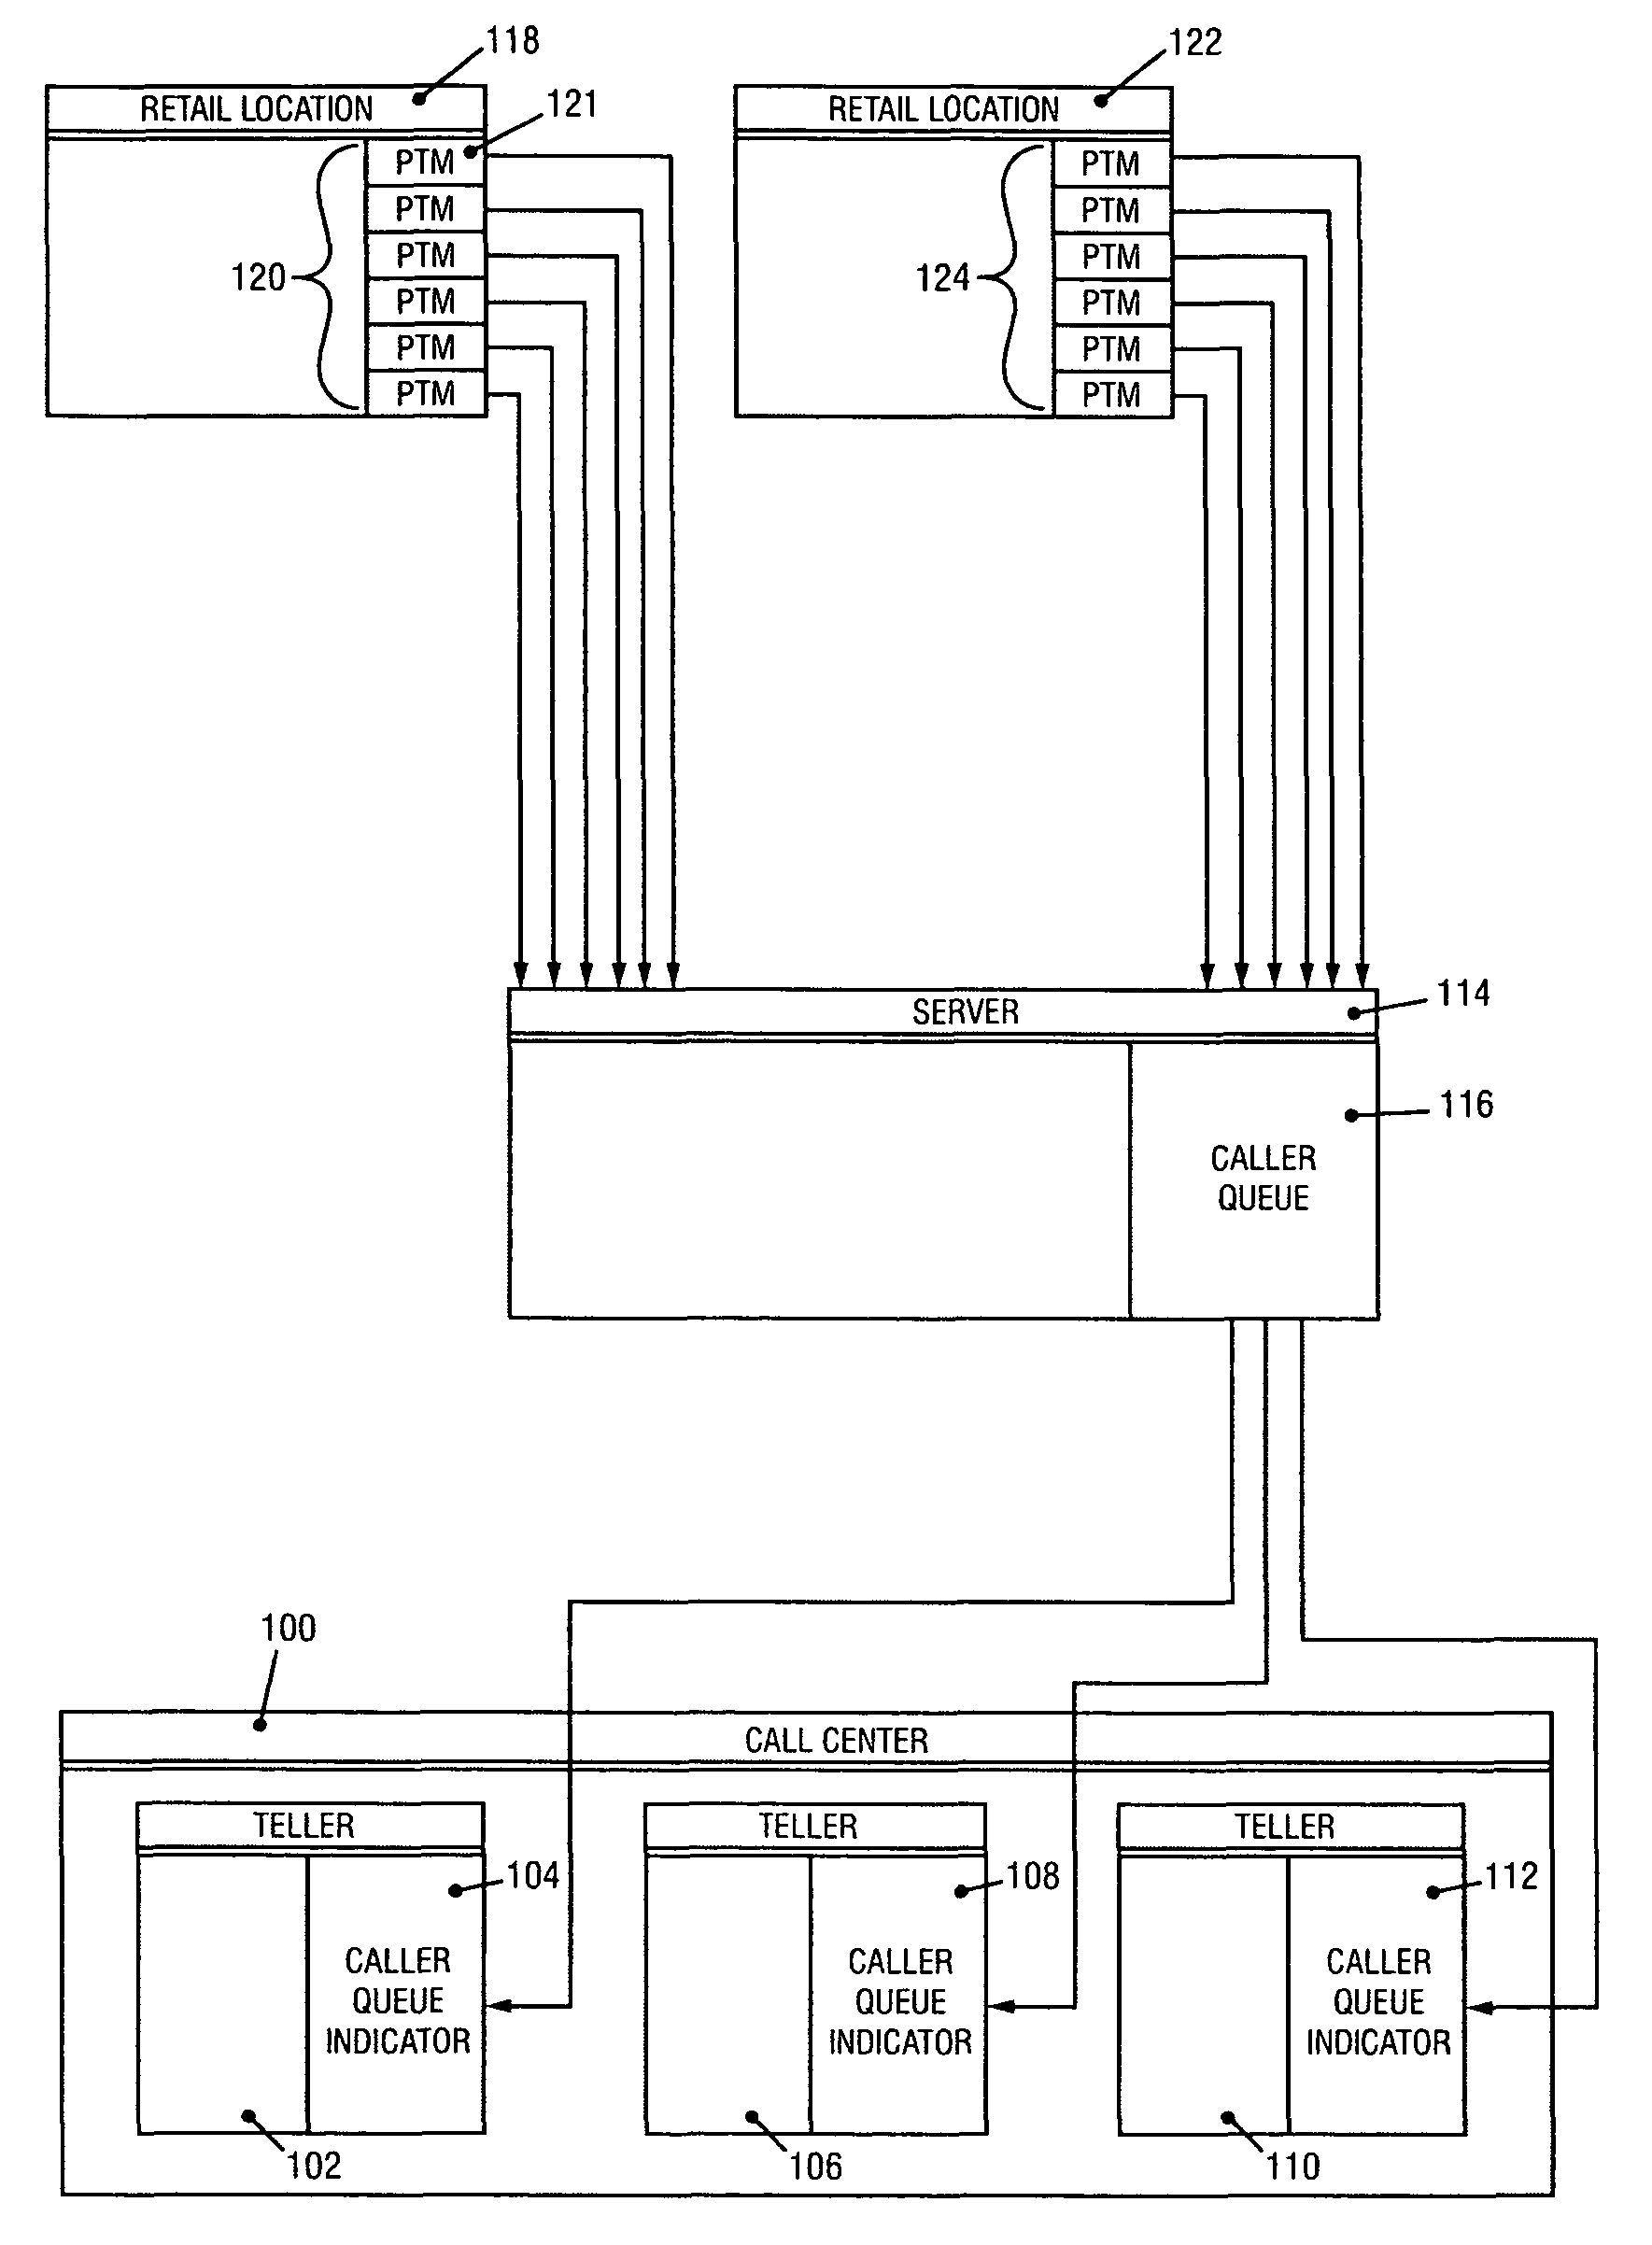 Personal teller system and method of remote interactive and personalized banking